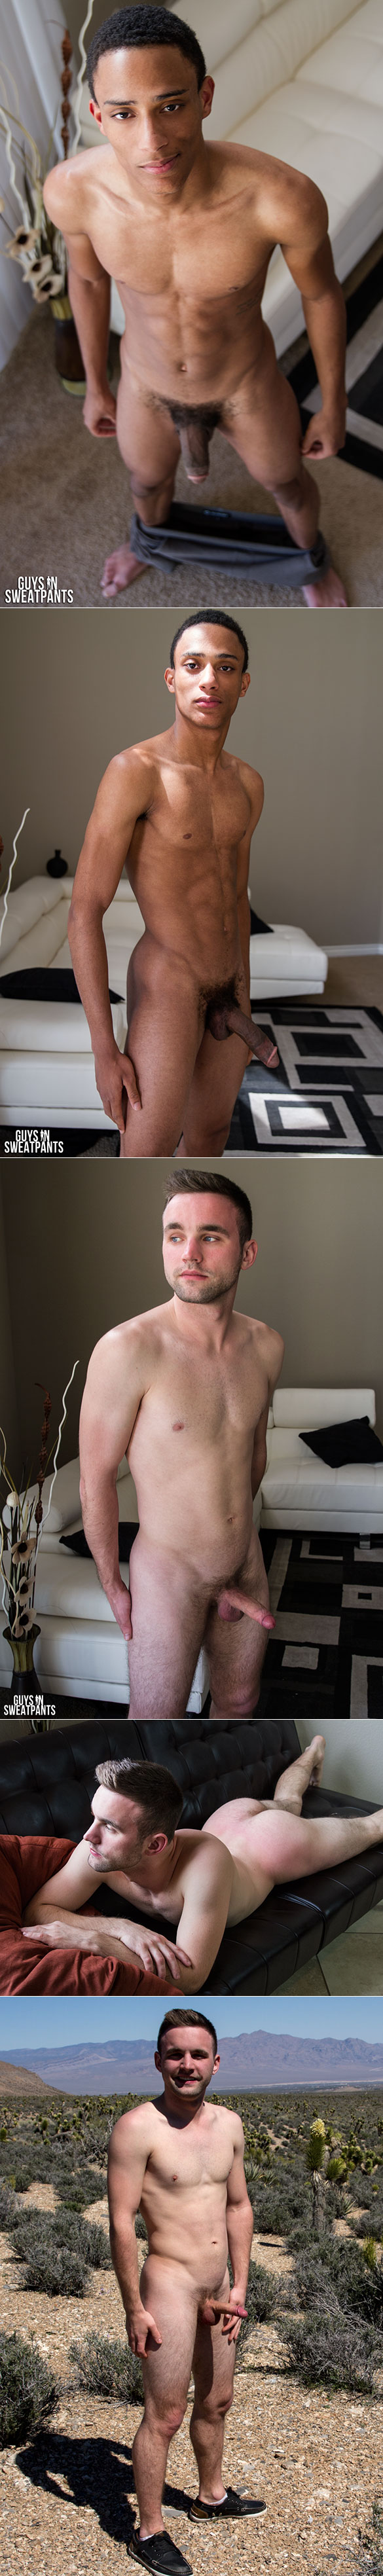 GuysInSweatpants: Andrew Collins gets creampied by Justin Edwards, Liam Cyber and Austin Wilde